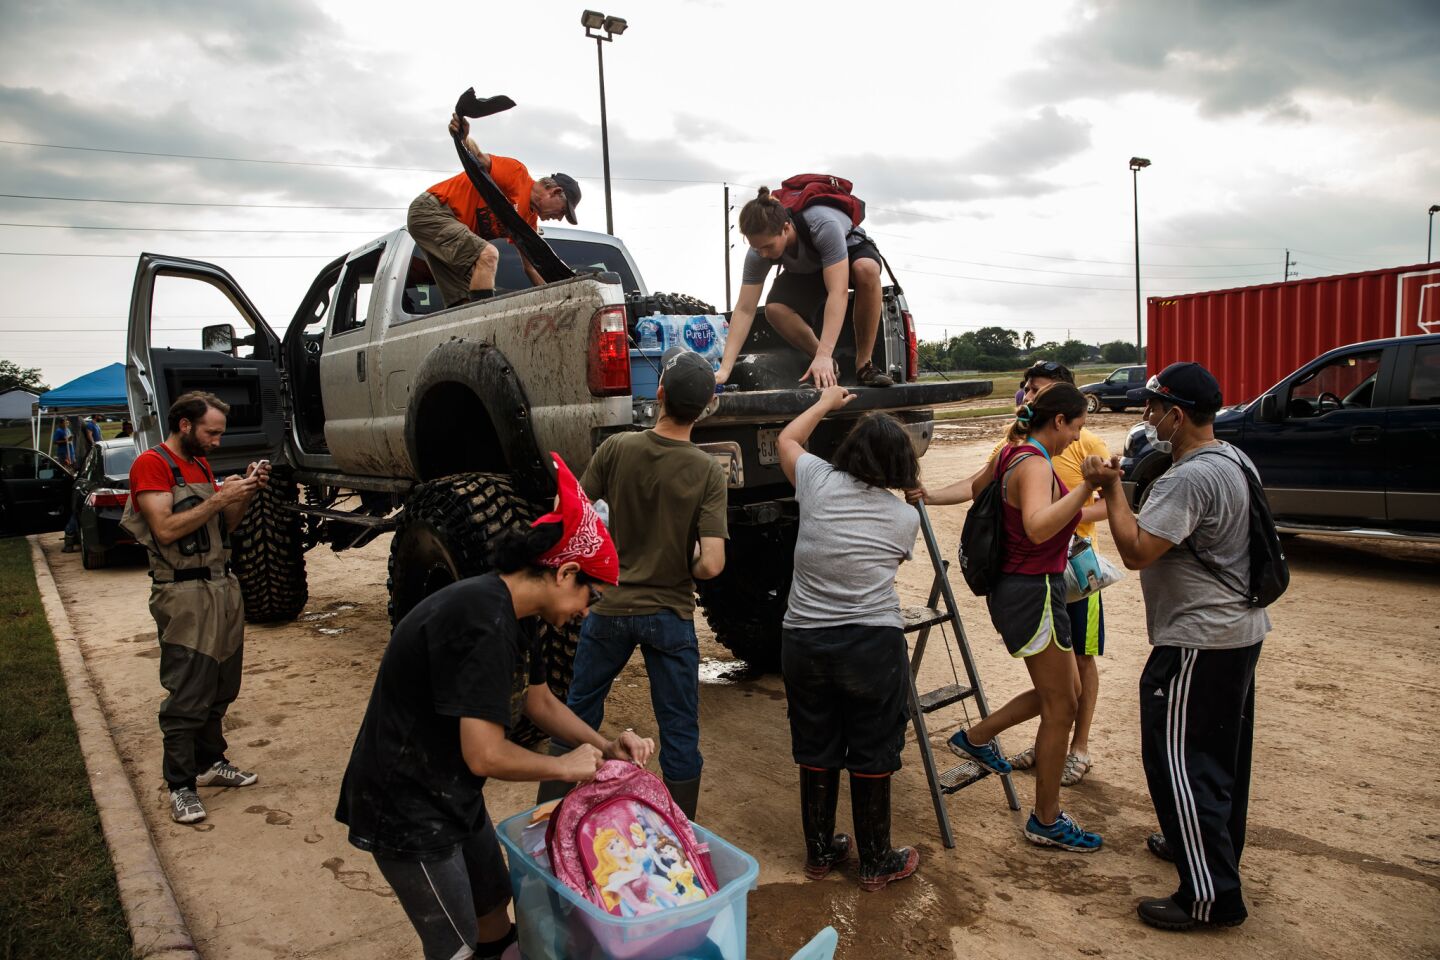 People hop off Chris Ginter's truck as he helps ferry residents around Katy, Texas.